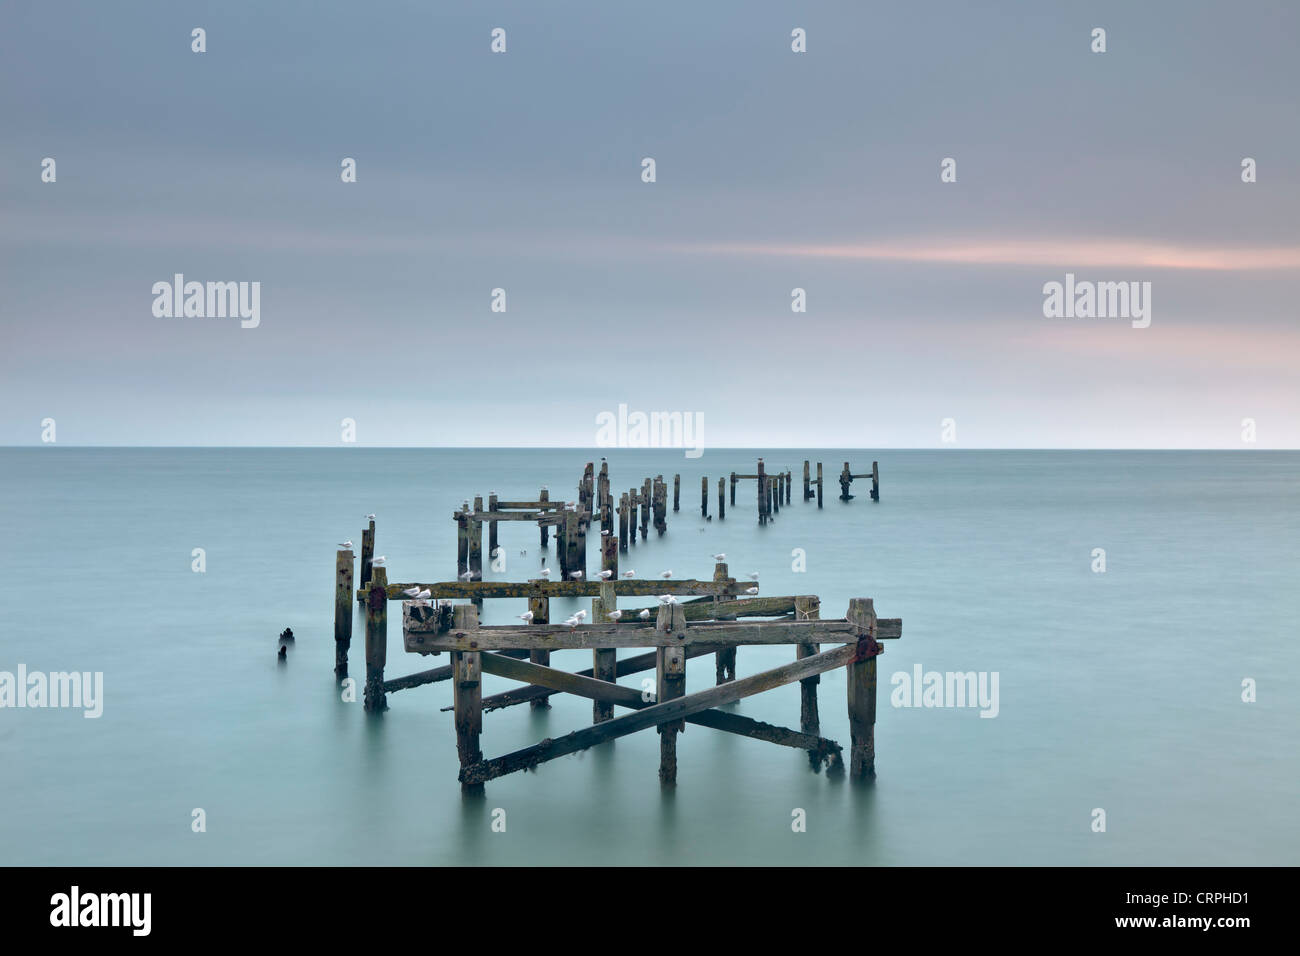 Seagulls perched on the rotting supports of the old wooden pier. Stock Photo